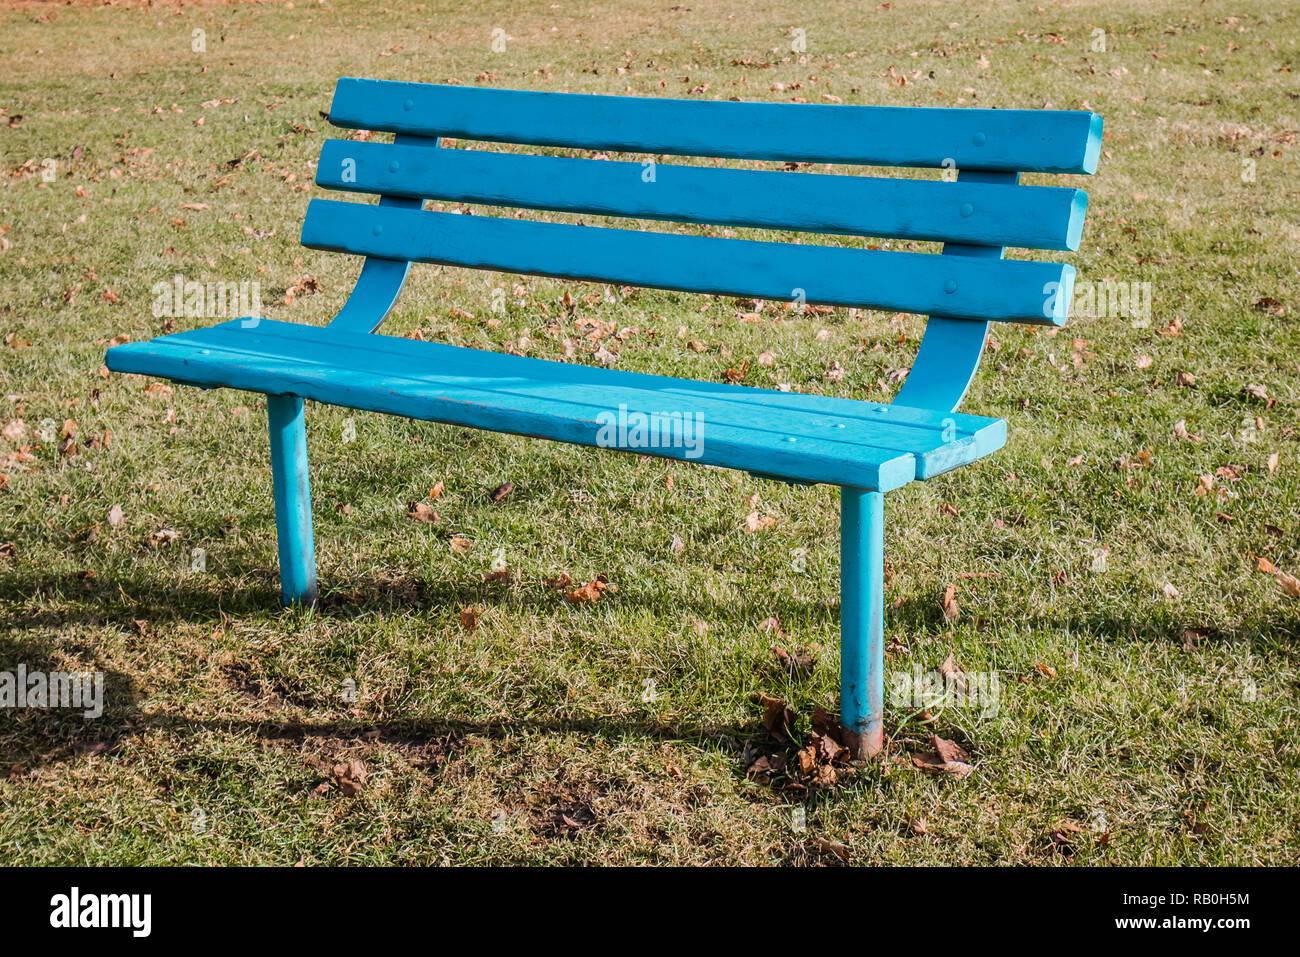 outdoor bench spray painted in light blue or aqua color Stock Photo